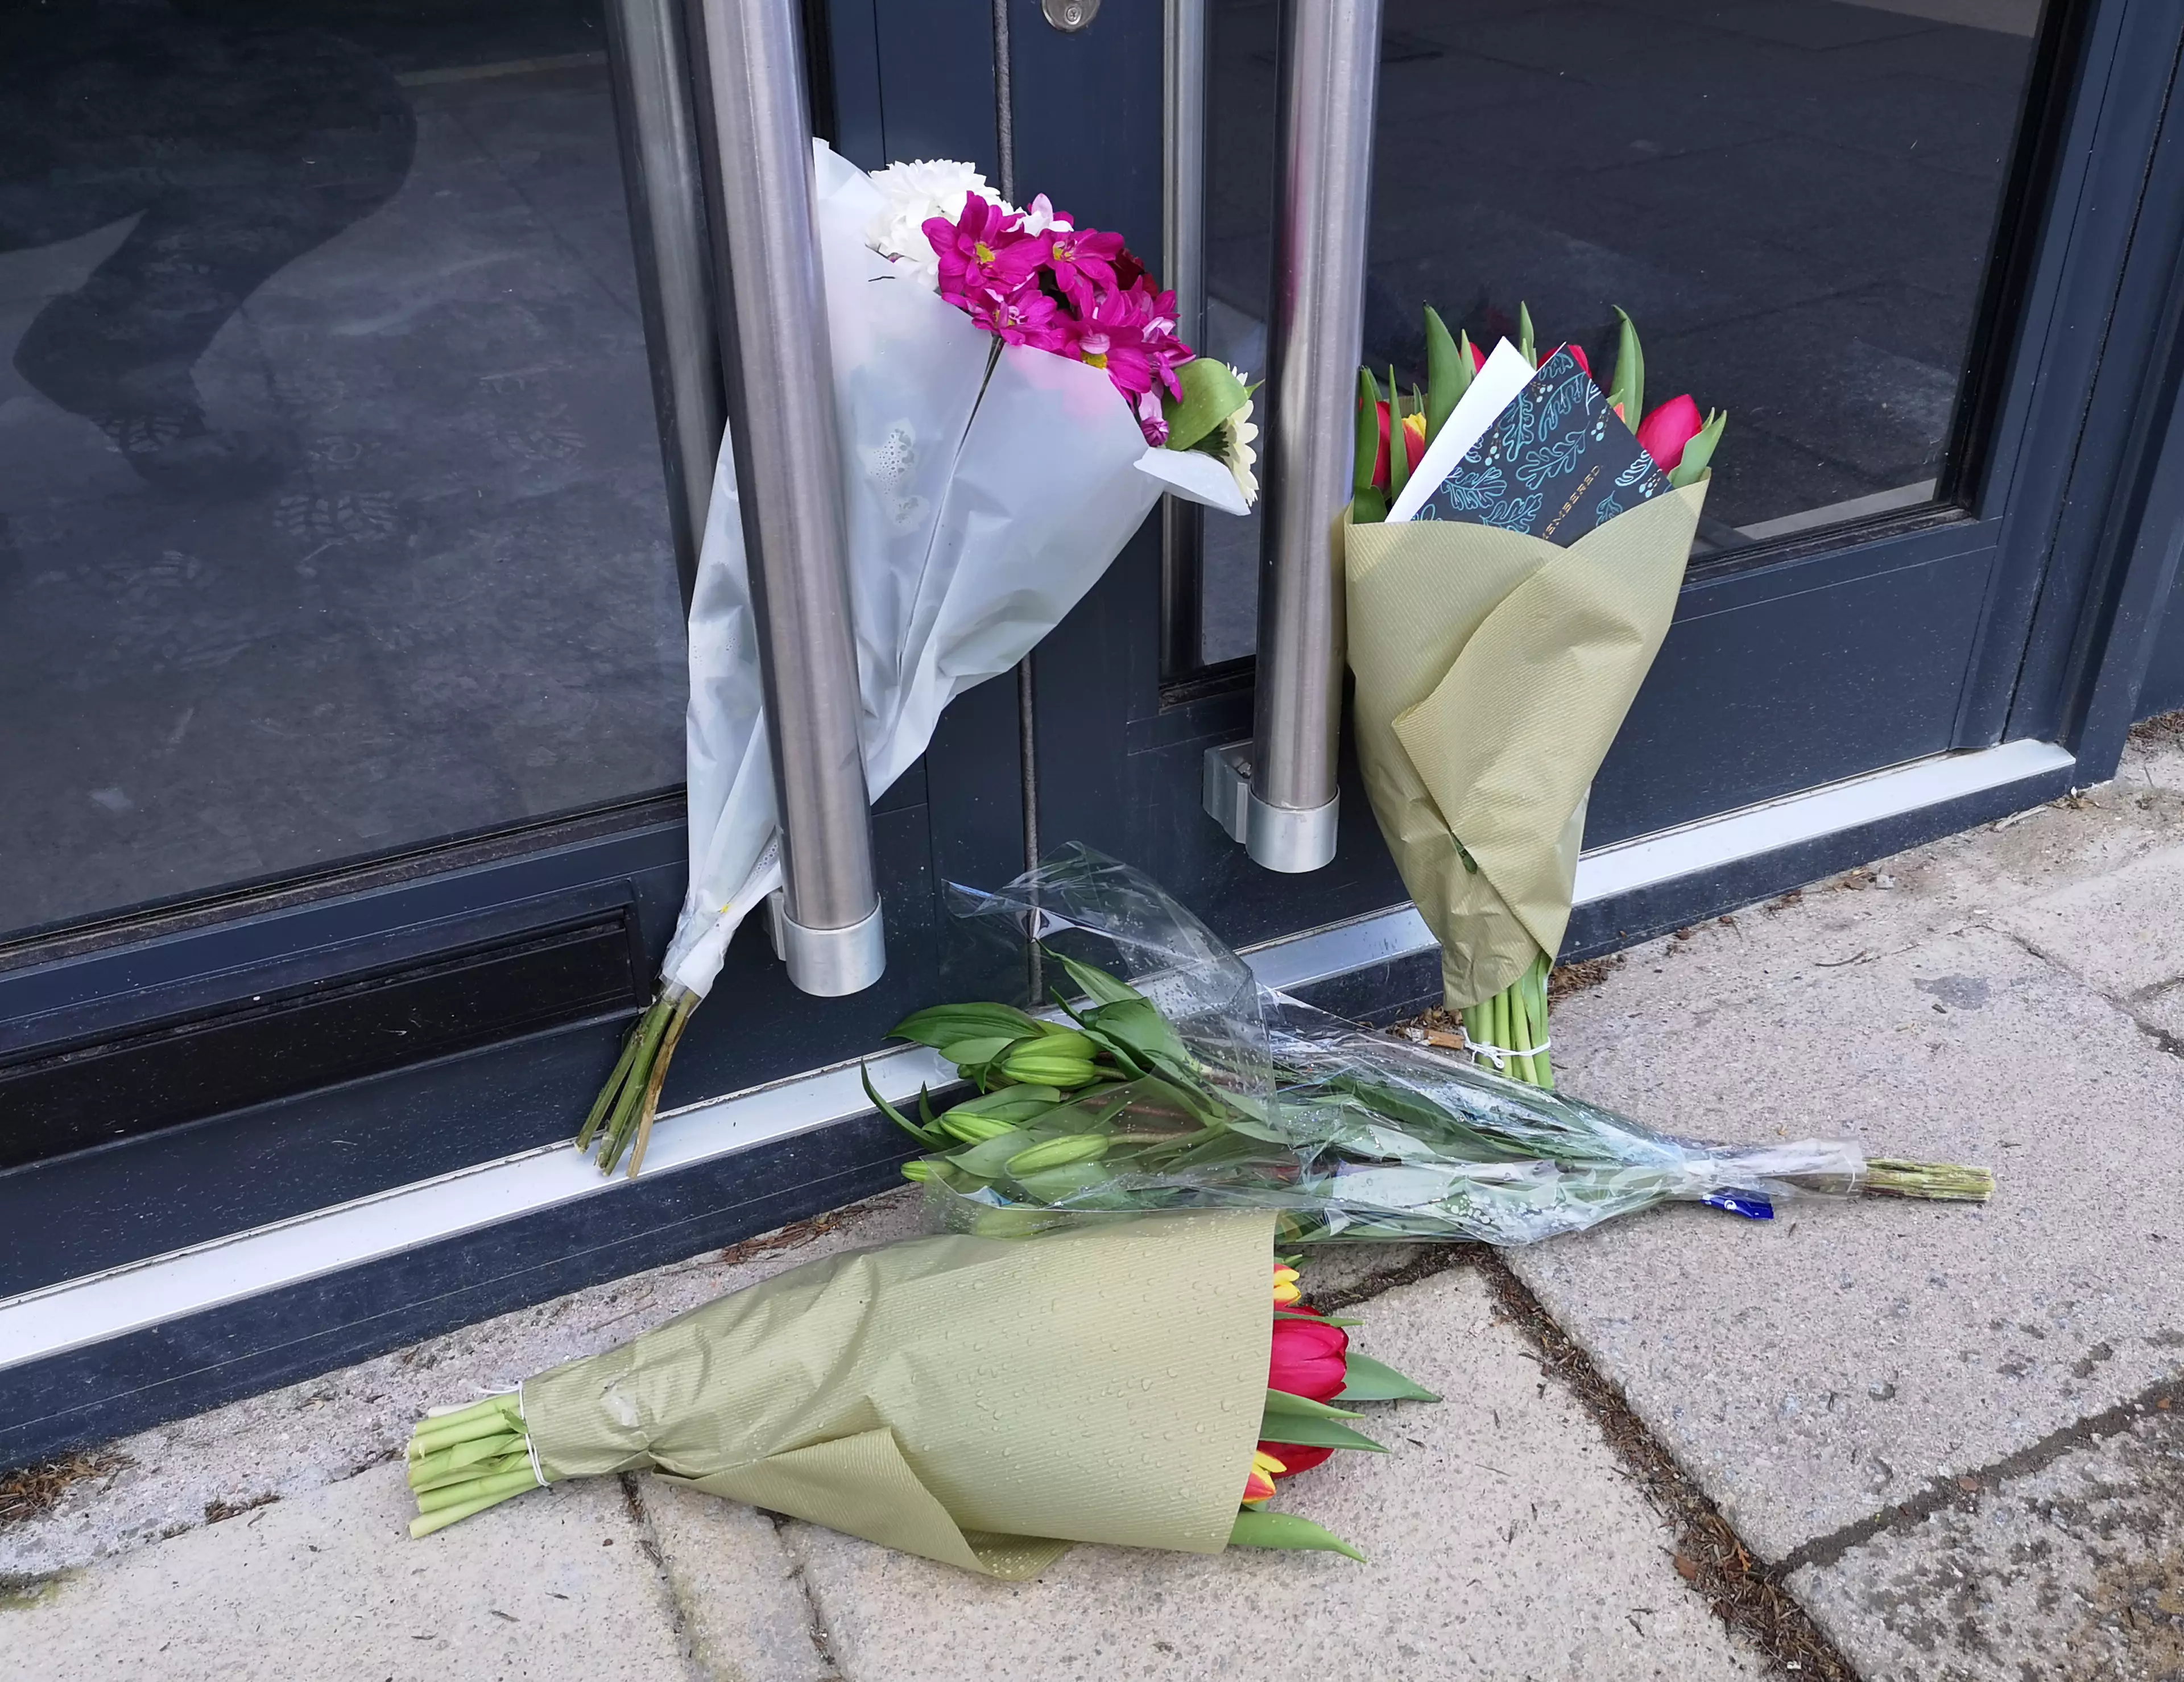 Tributes left outside the cafe that Mike Thalassitis planned to open.